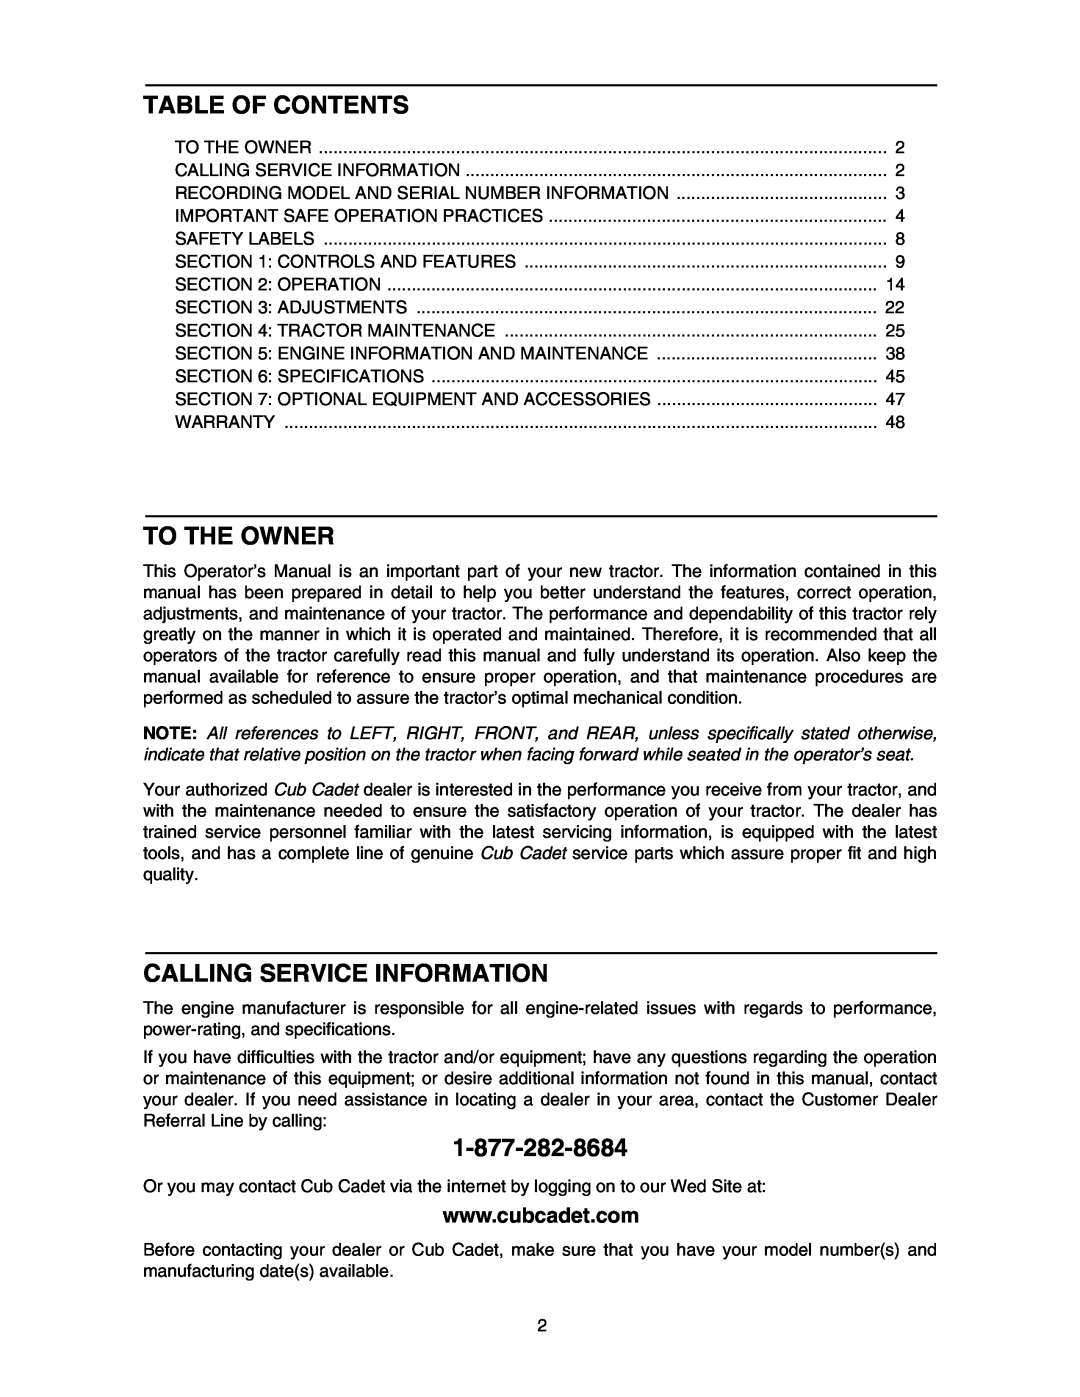 Cub Cadet 5264D manual Table Of Contents, To The Owner, Calling Service Information 